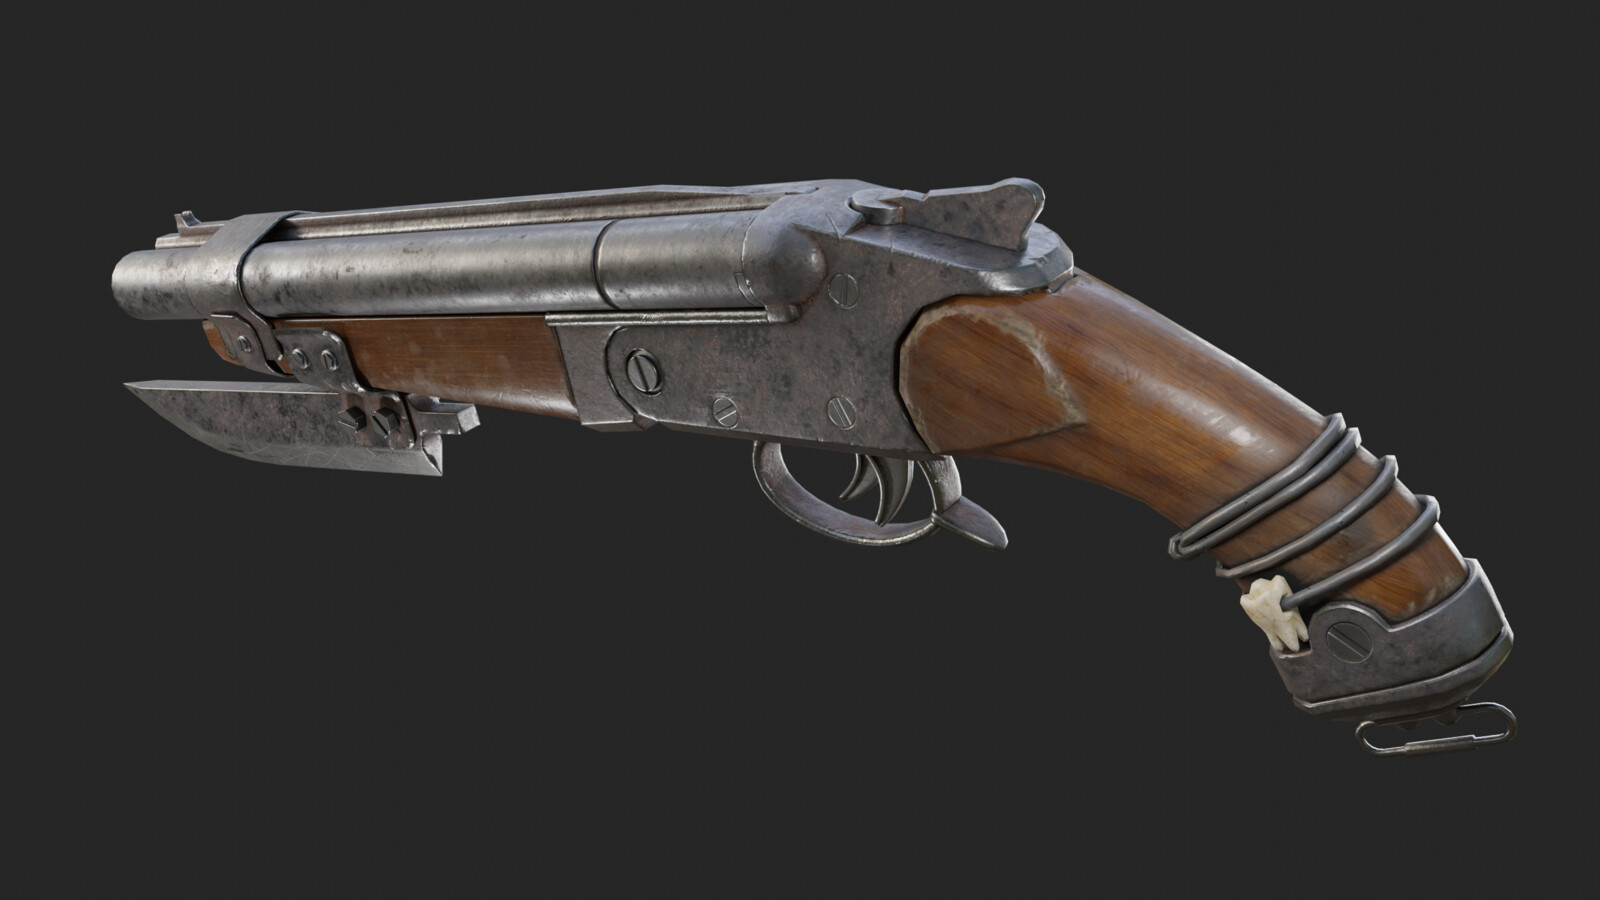 Sawed-off variant based of Adam Adamowicz's concept art.